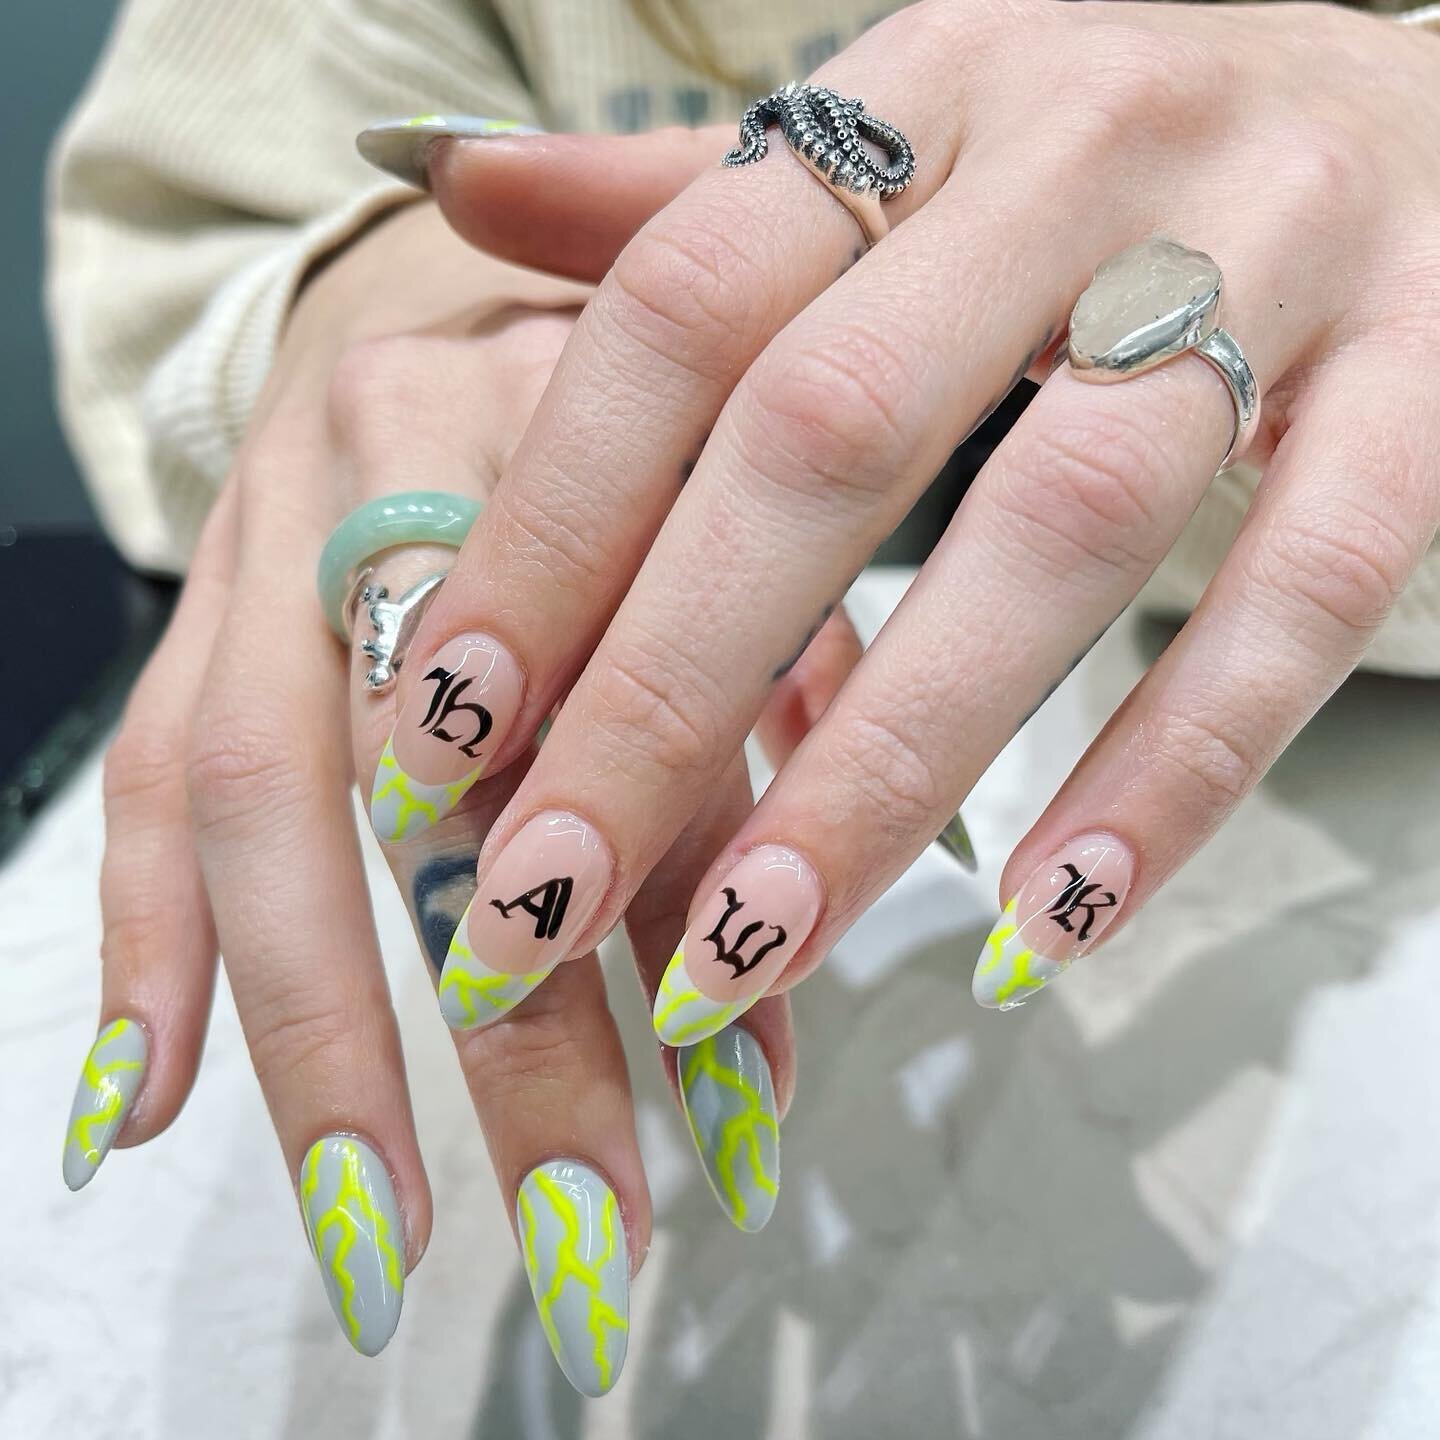 Discover more than 119 boston nails and spa super hot